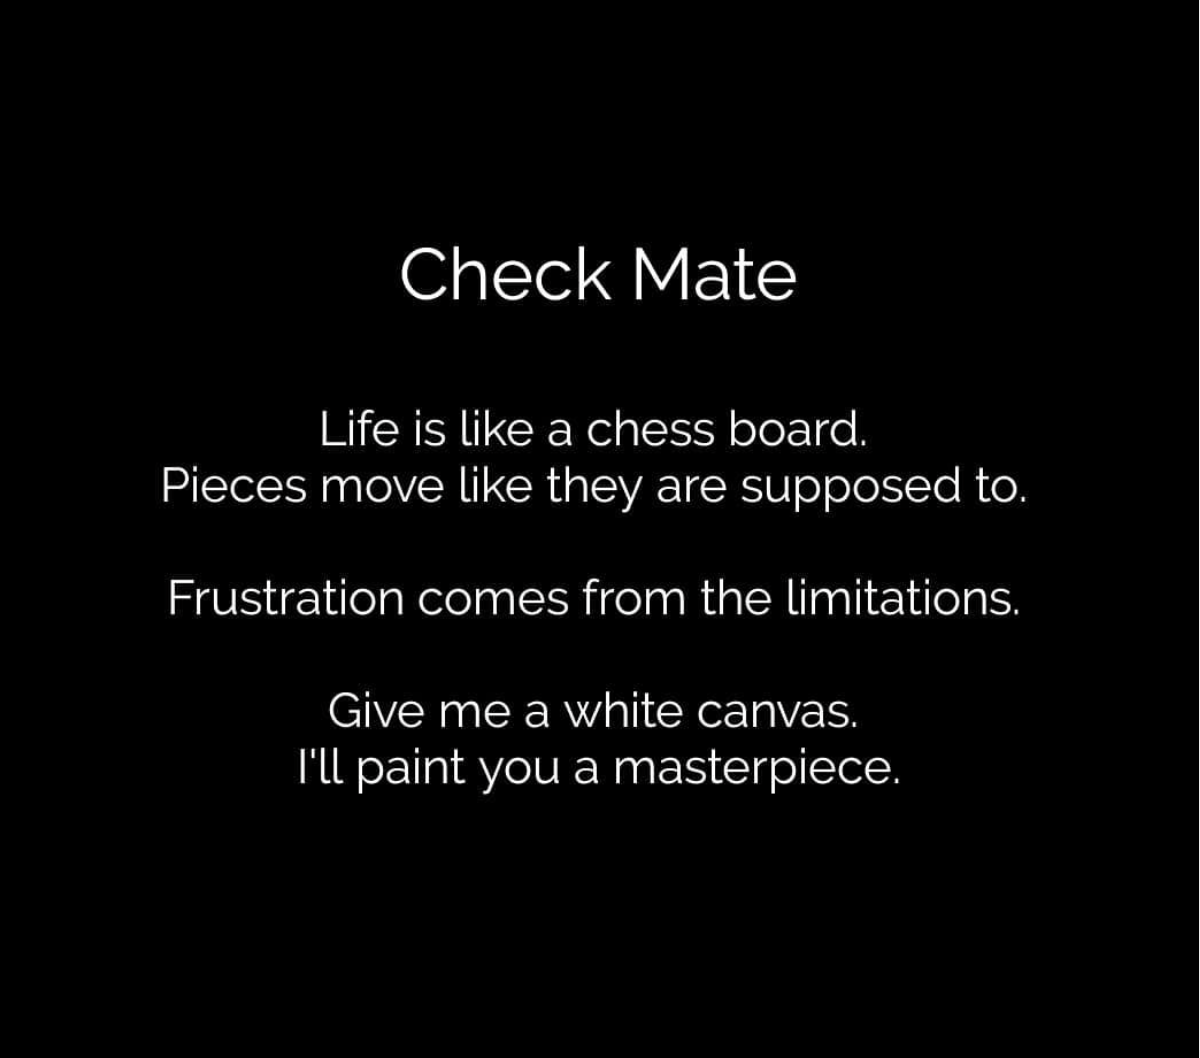 Poem Checkmate by Marc Surchat